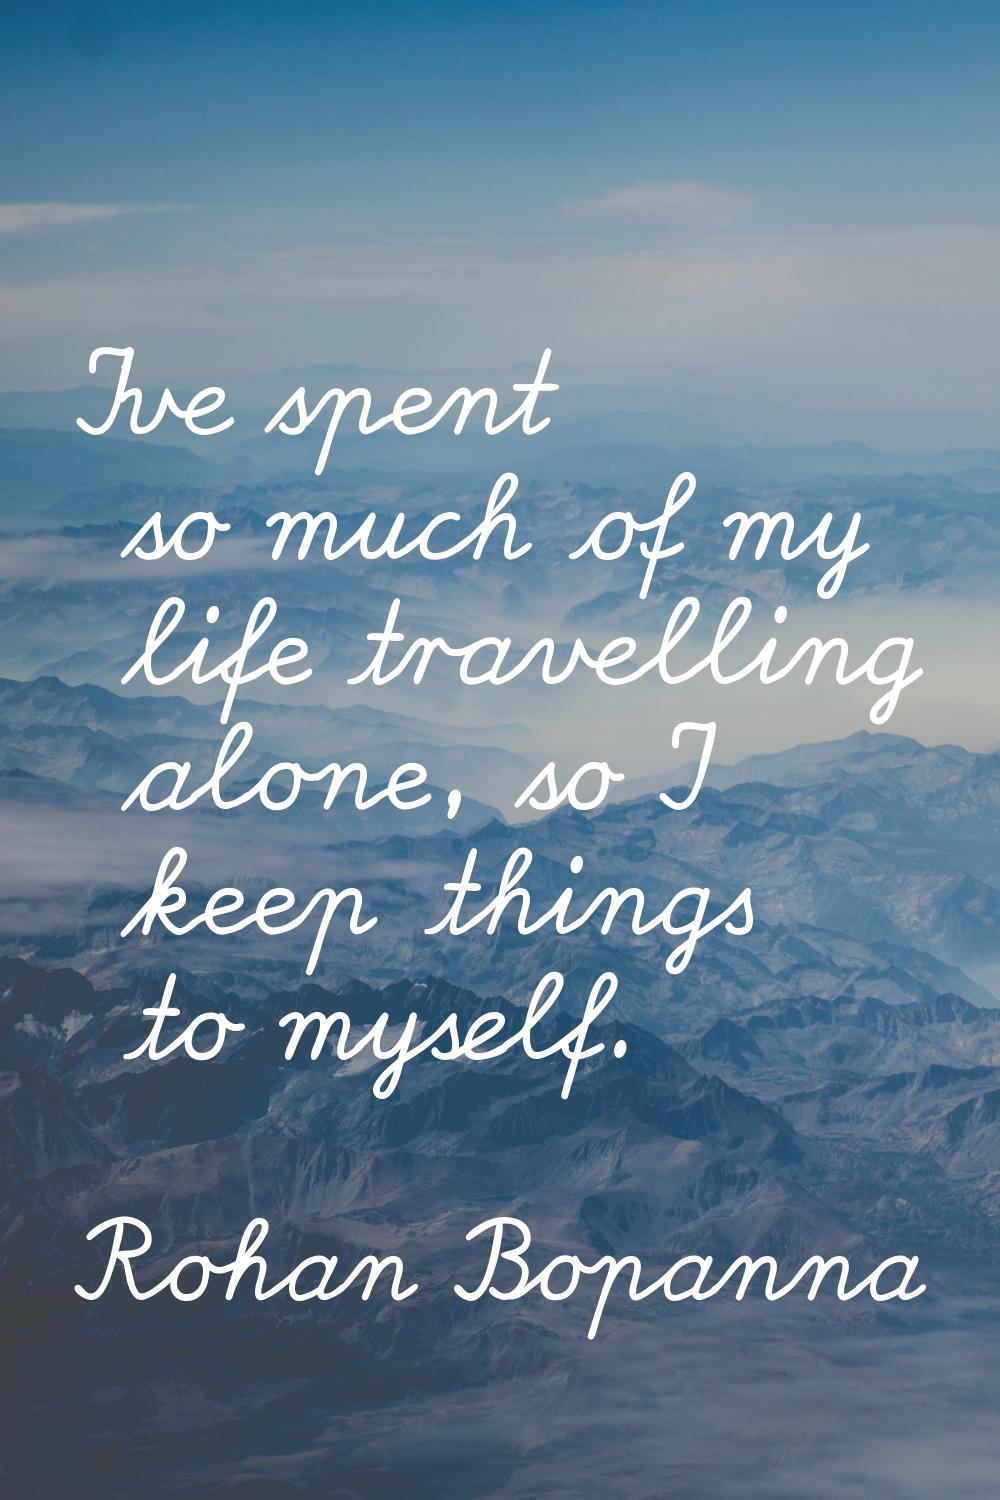 I've spent so much of my life travelling alone, so I keep things to myself.